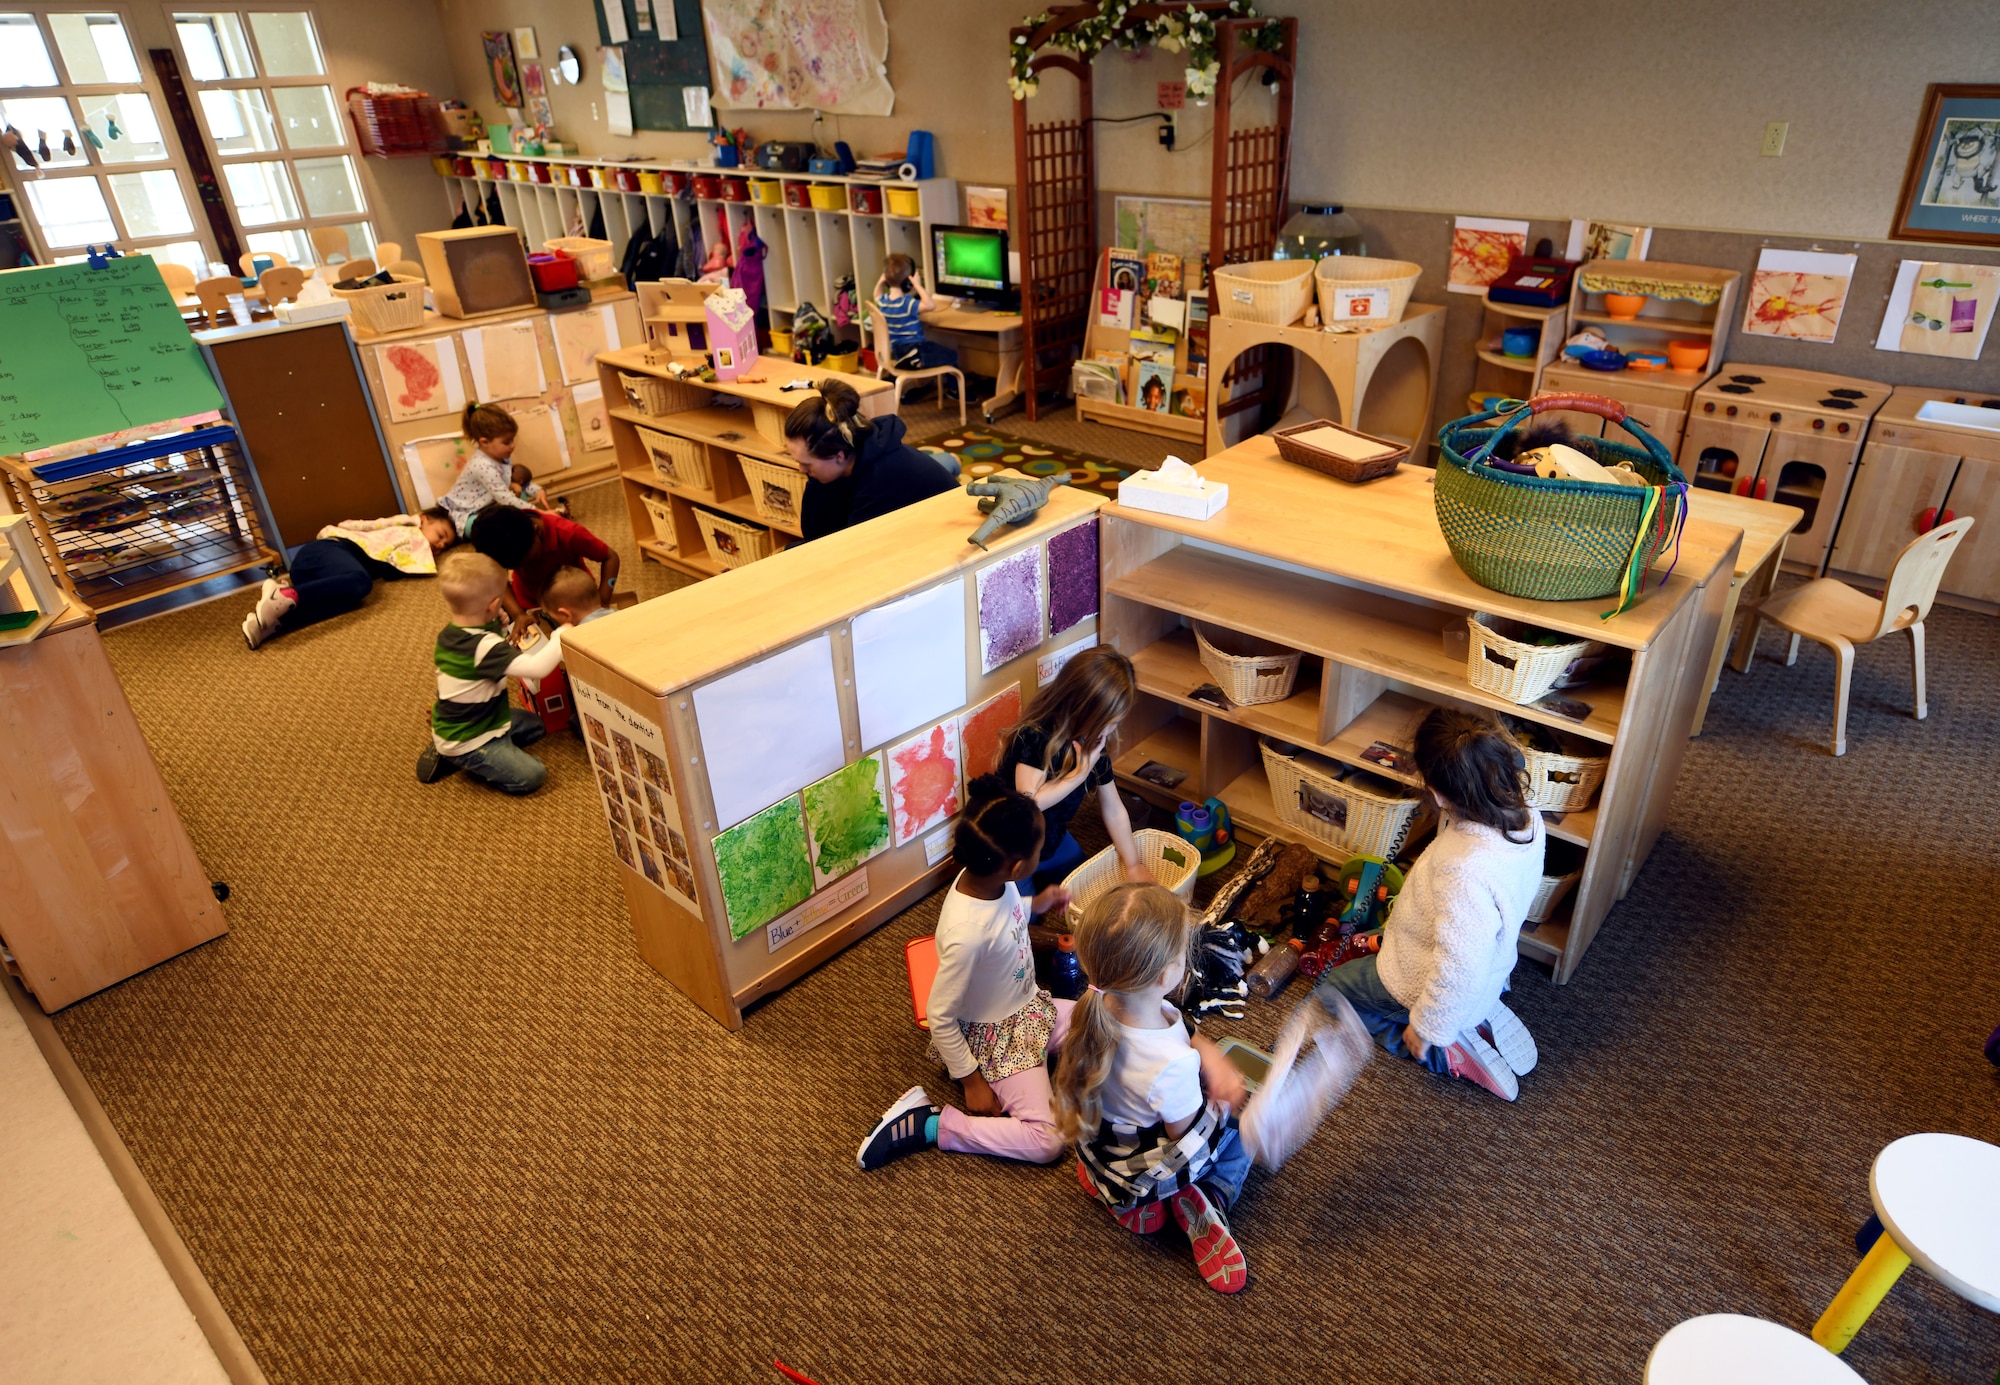 Children from room 135 participate in open playtime at the McRaven Child Development Center on Ellsworth Air Force Base, S.D., March 19, 2019. In the coming months, all Air Force CDC’s are scheduled to begin operating under the new Early Learning Matters curriculum. The curriculum was specifically developed with military children in mind.